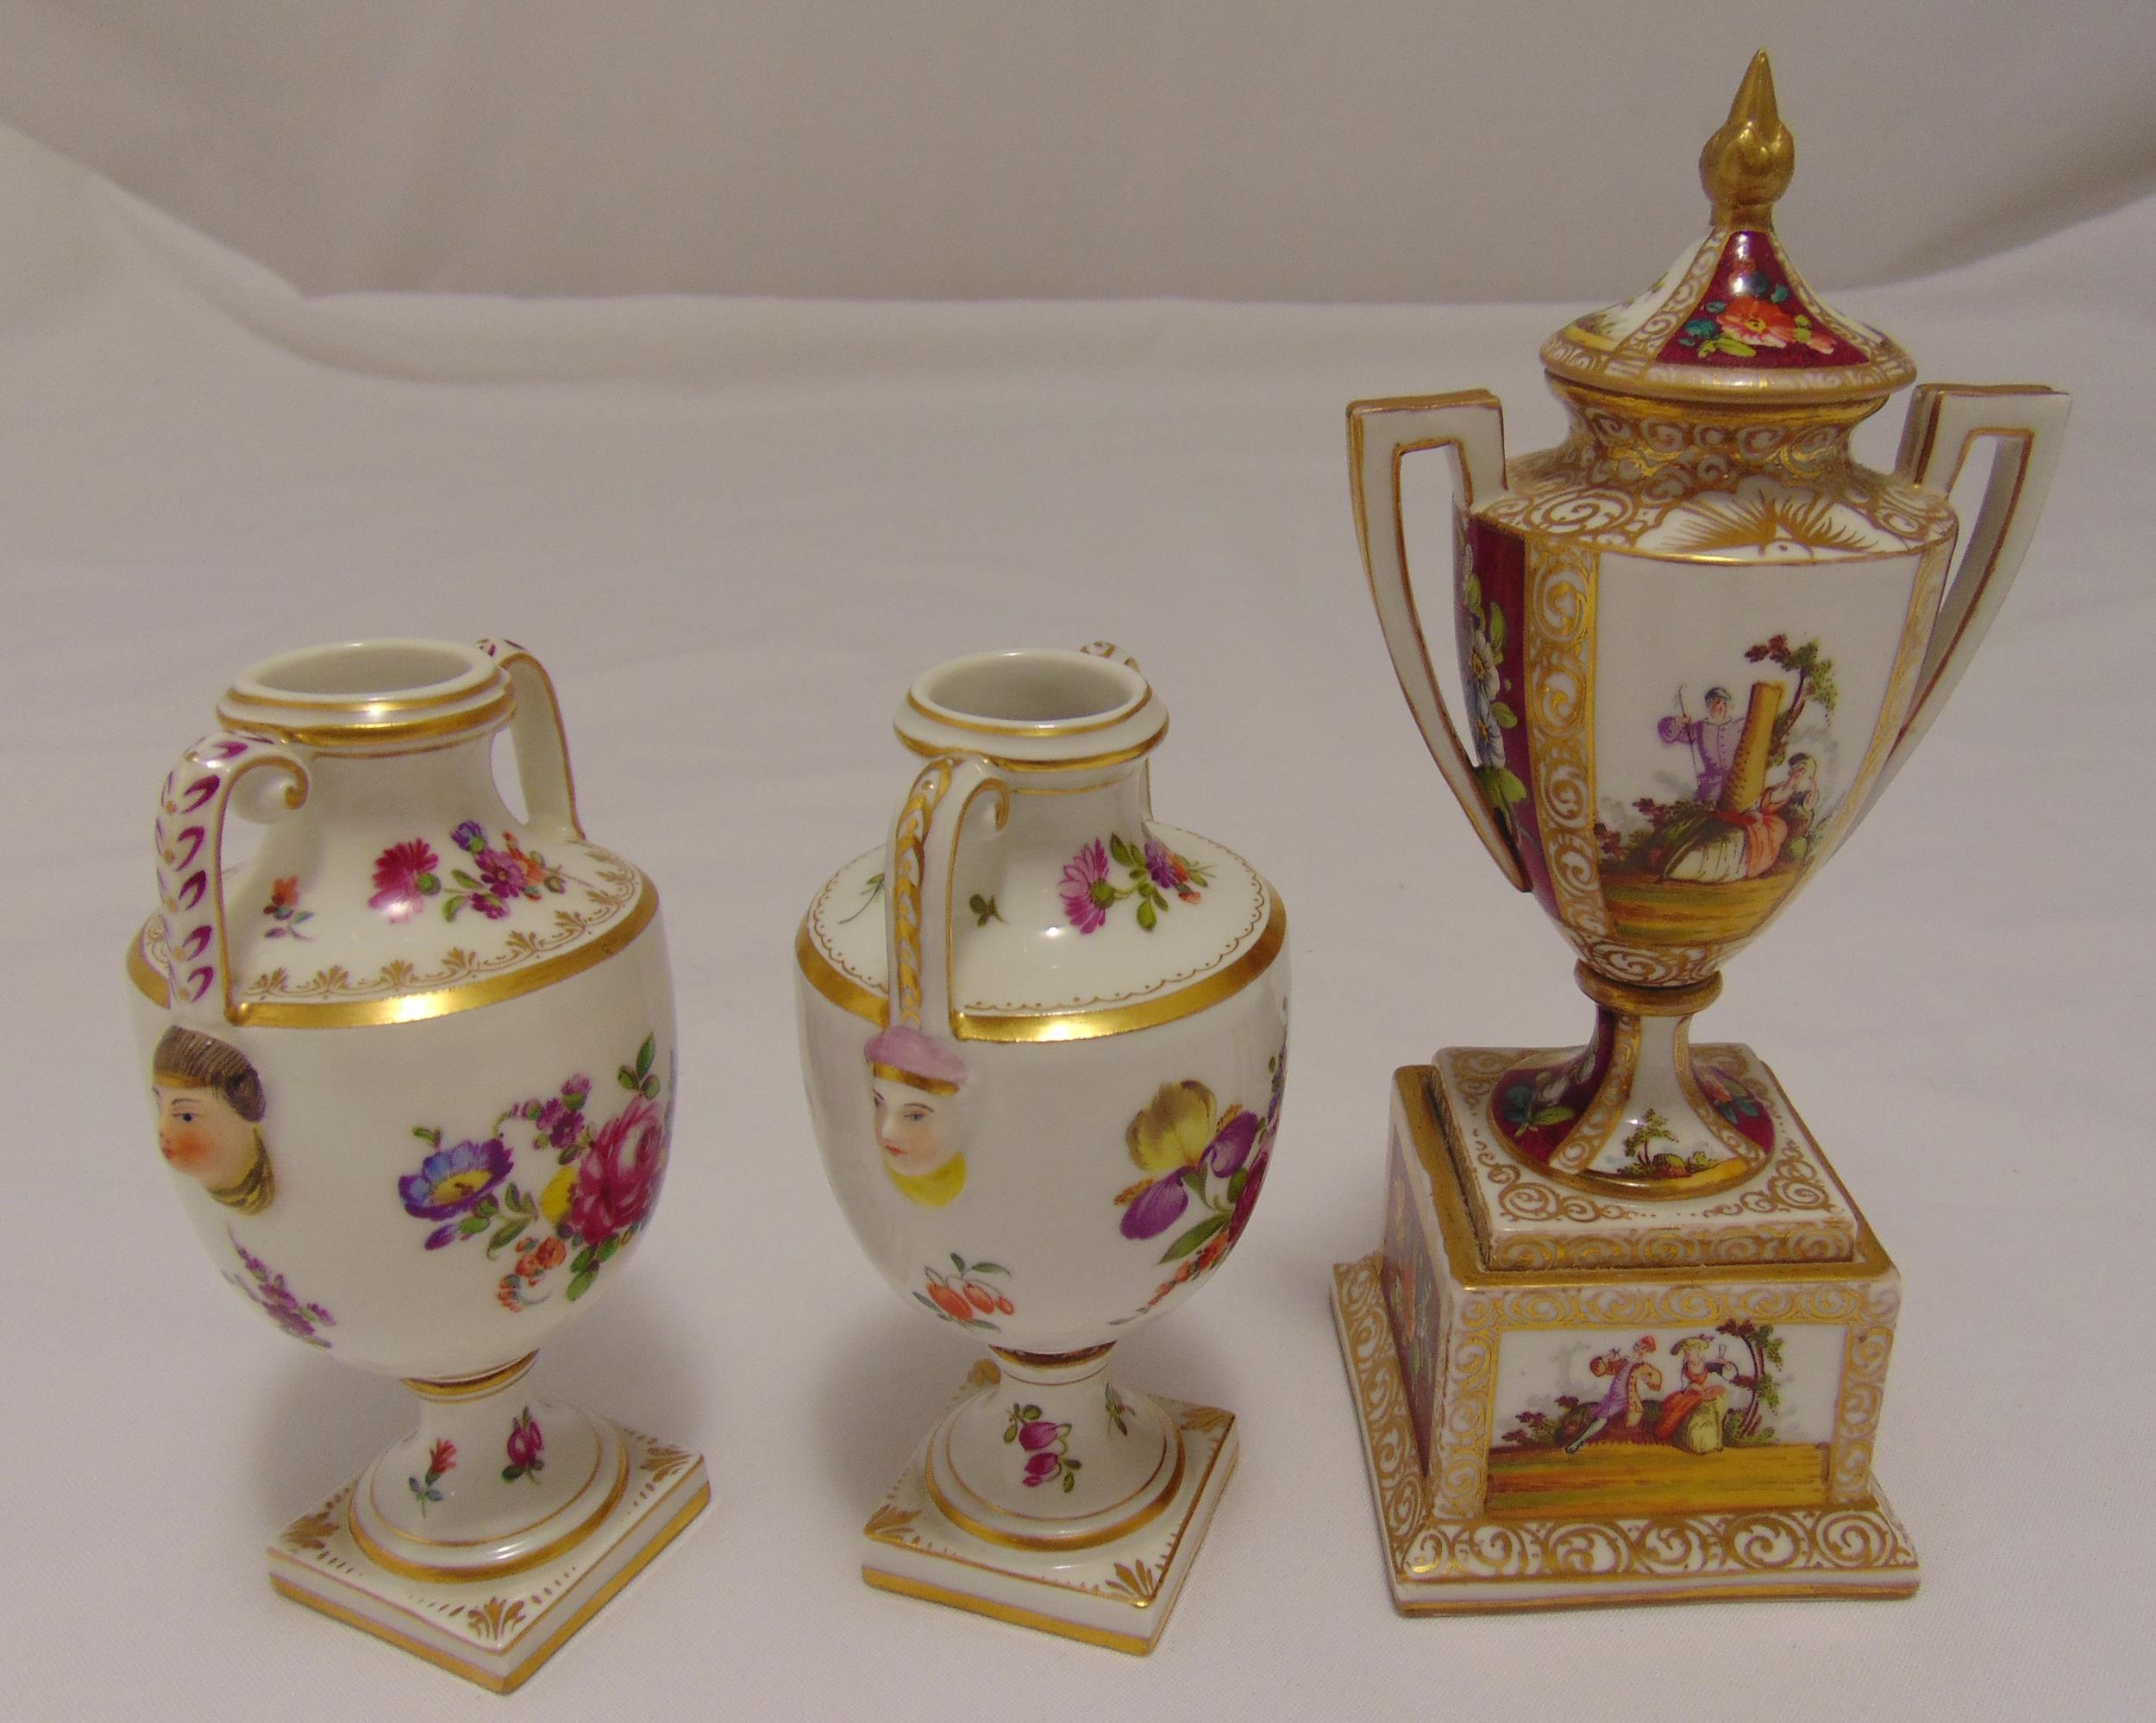 A pair of Dresden two handled vases decorated with flowers, leaves and masks below side handles